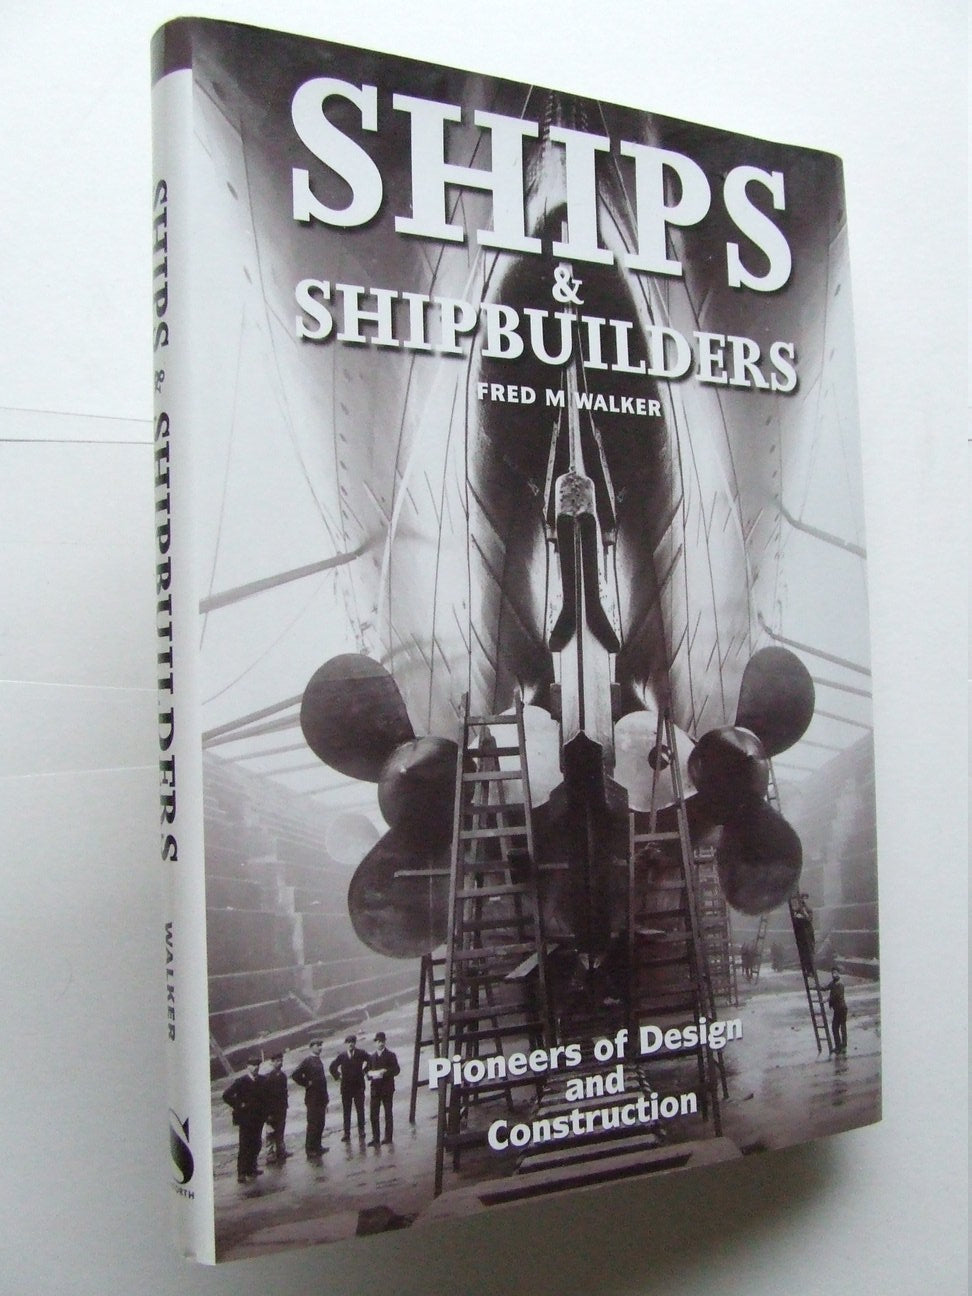 Ships & Shipbuilders, pioneers of design and construction